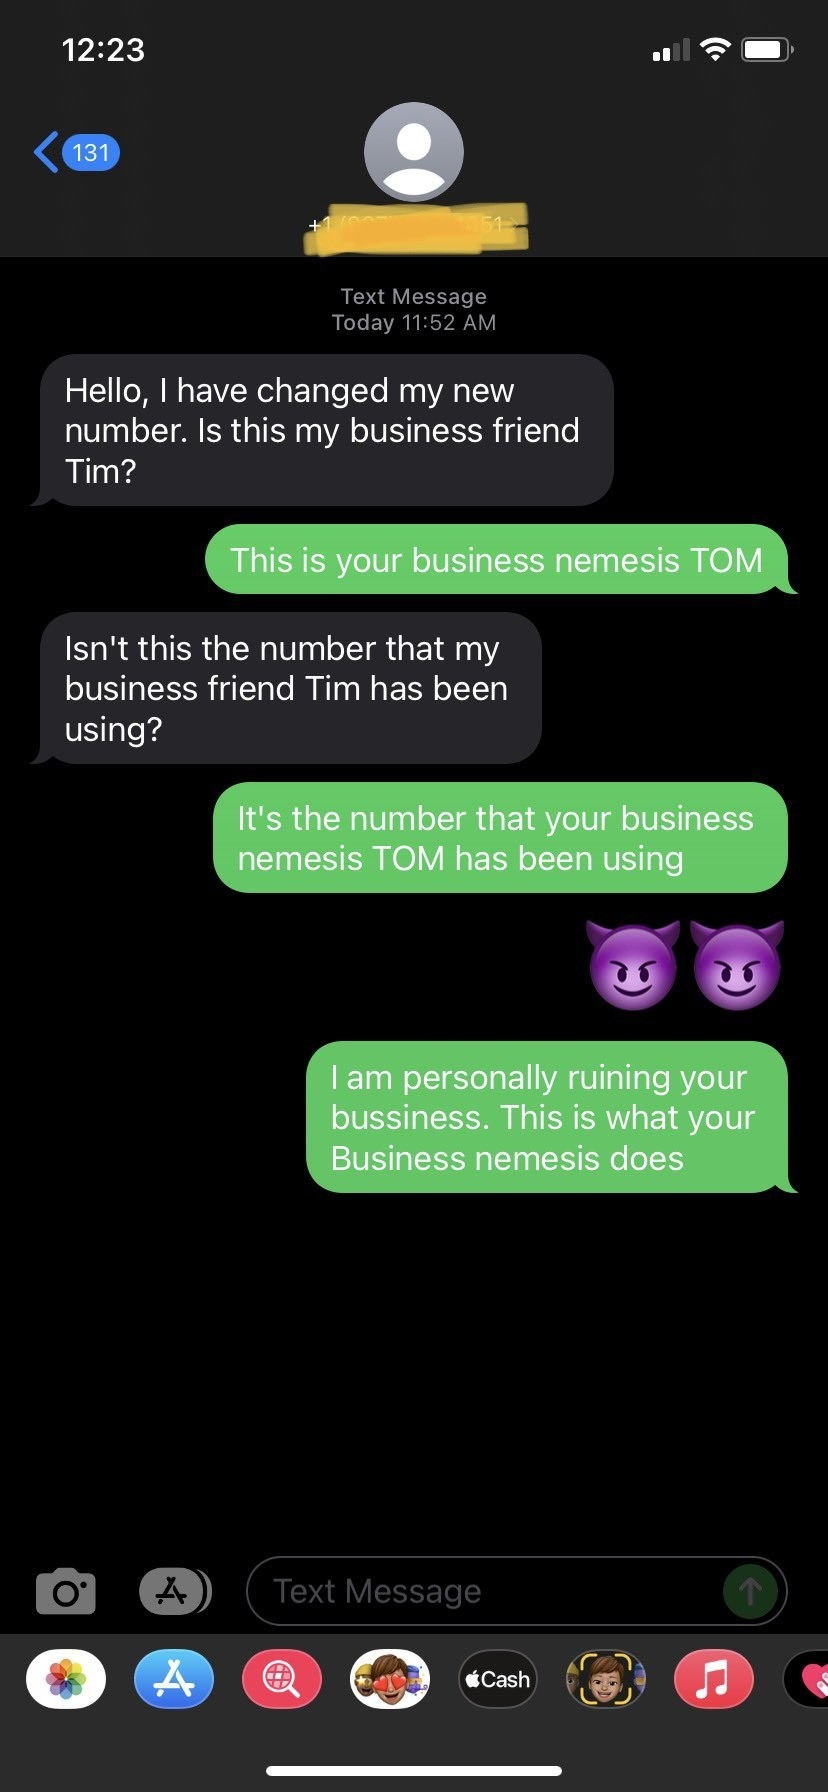 Scammer who texts someone about a business partner named Tom, and they text back they are their business enemy Tim